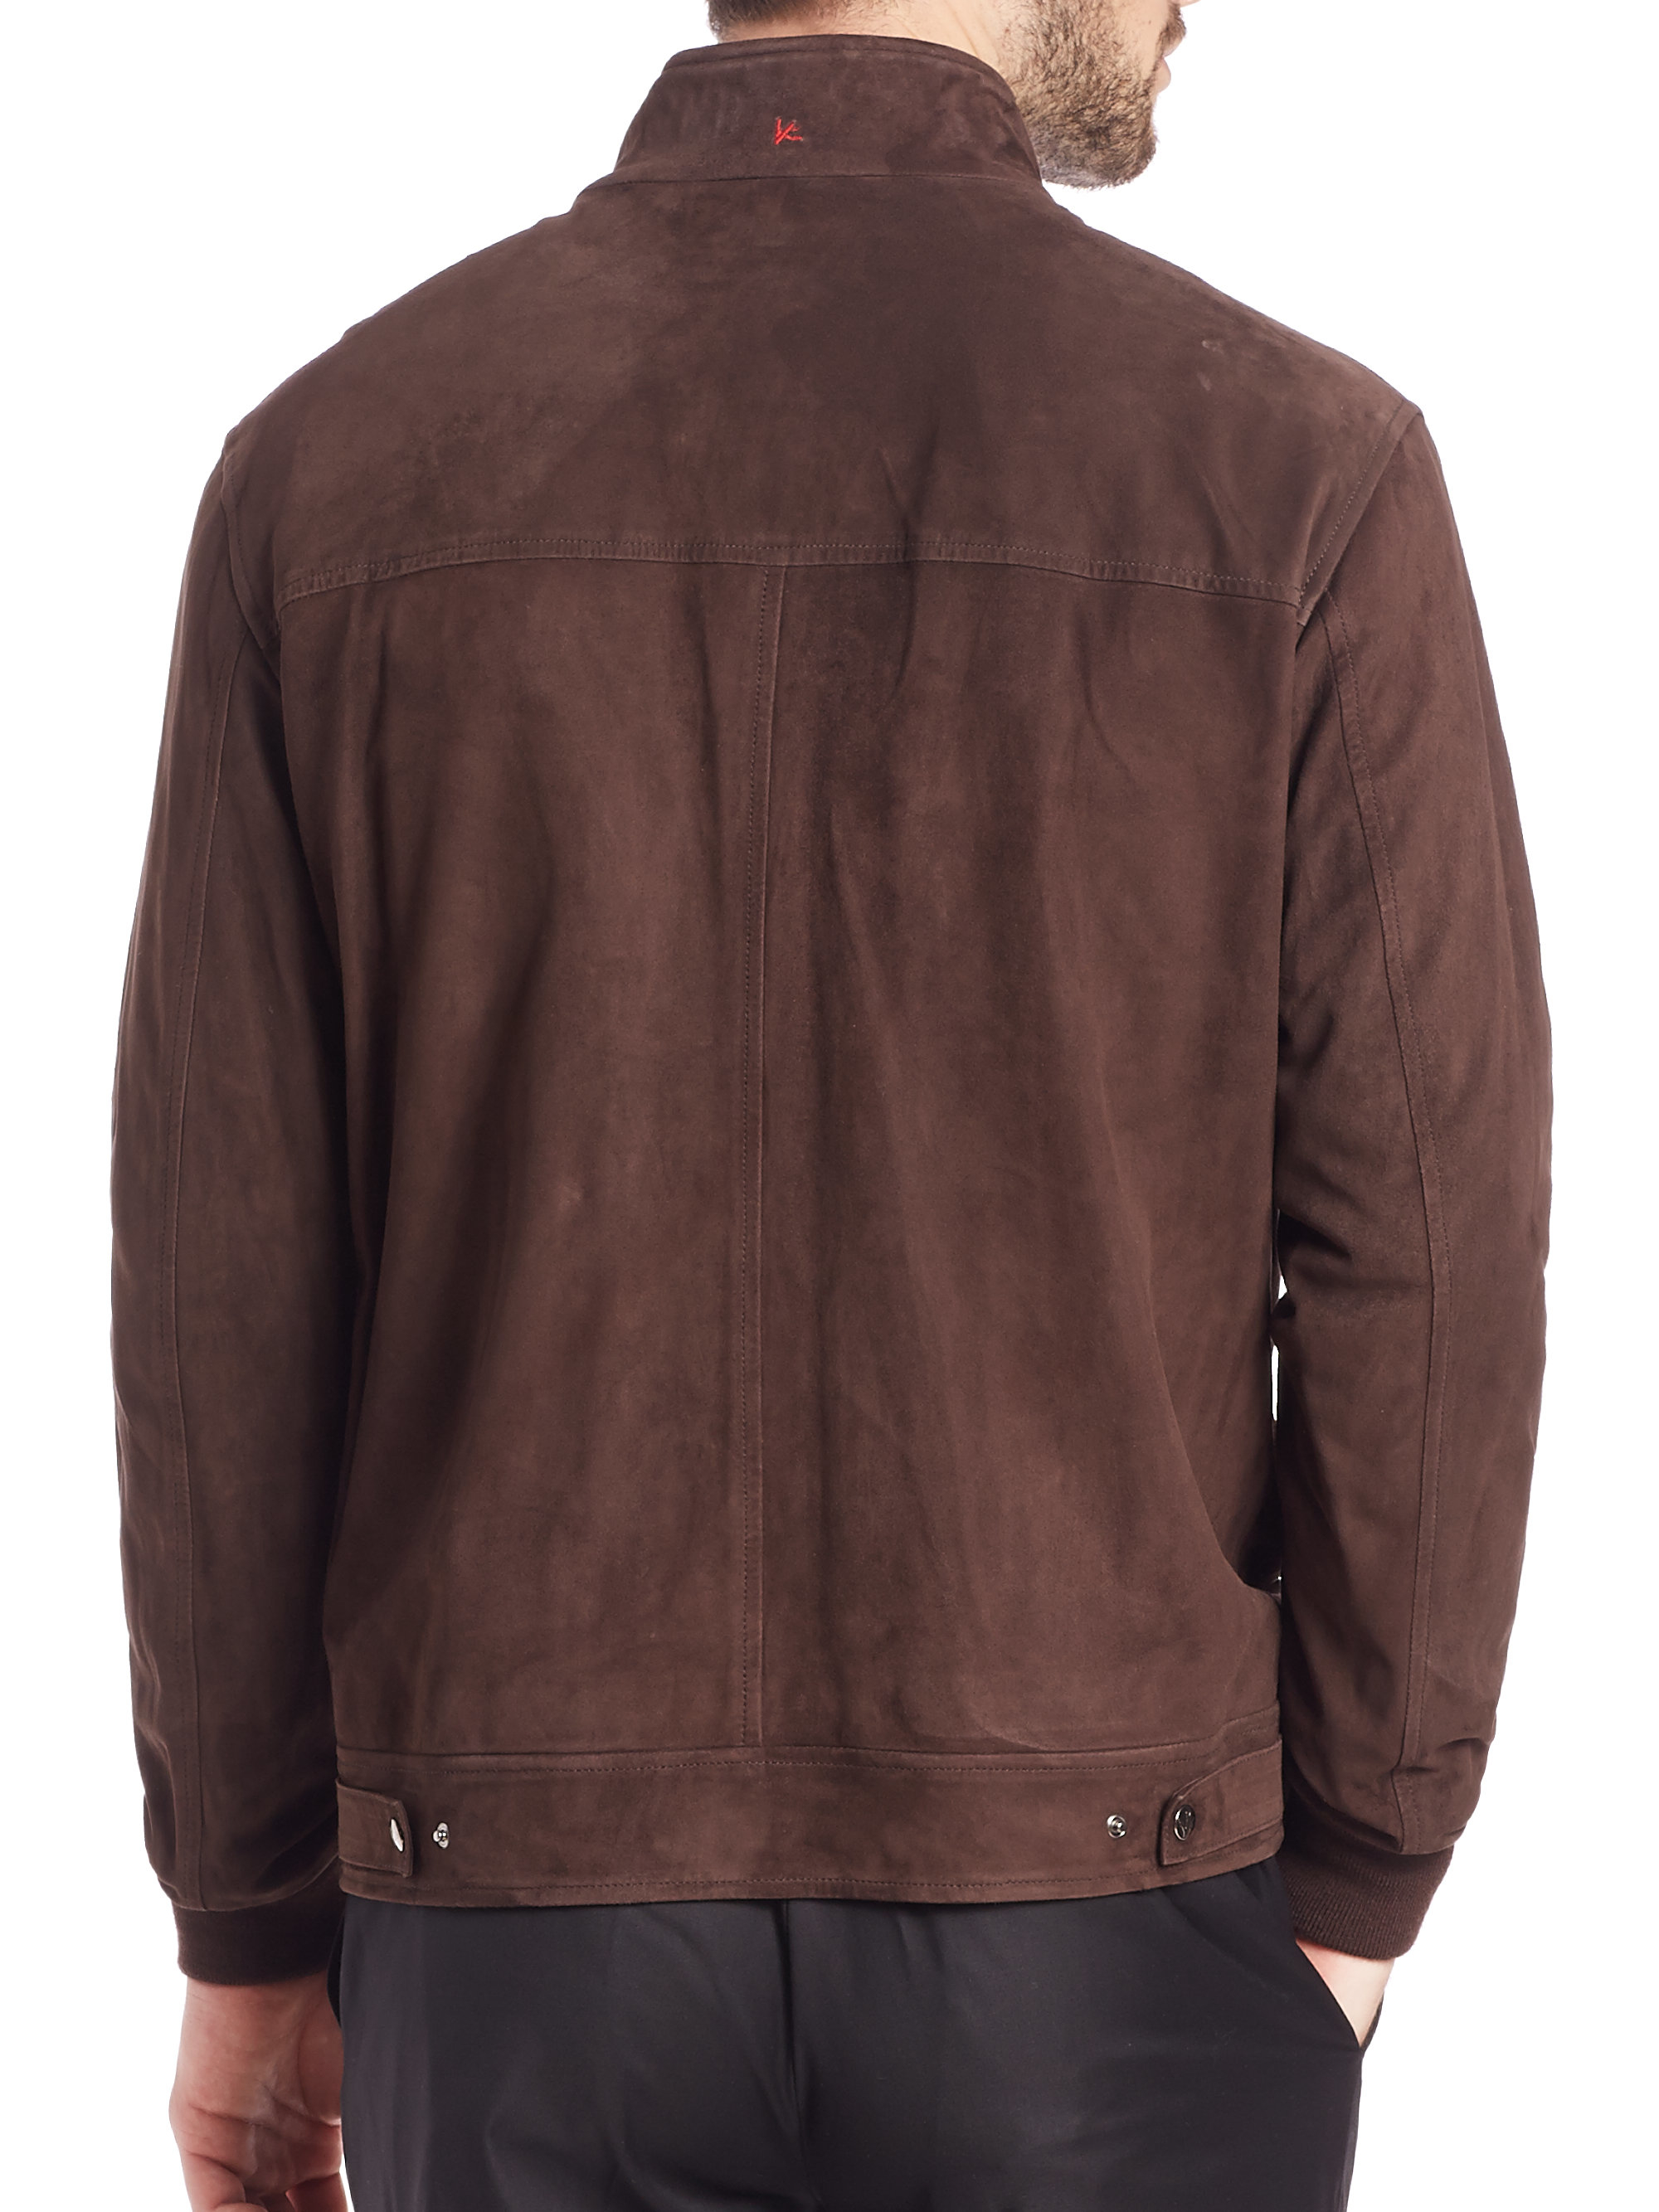 Lyst - Isaia Suede Bomber Jacket in Brown for Men